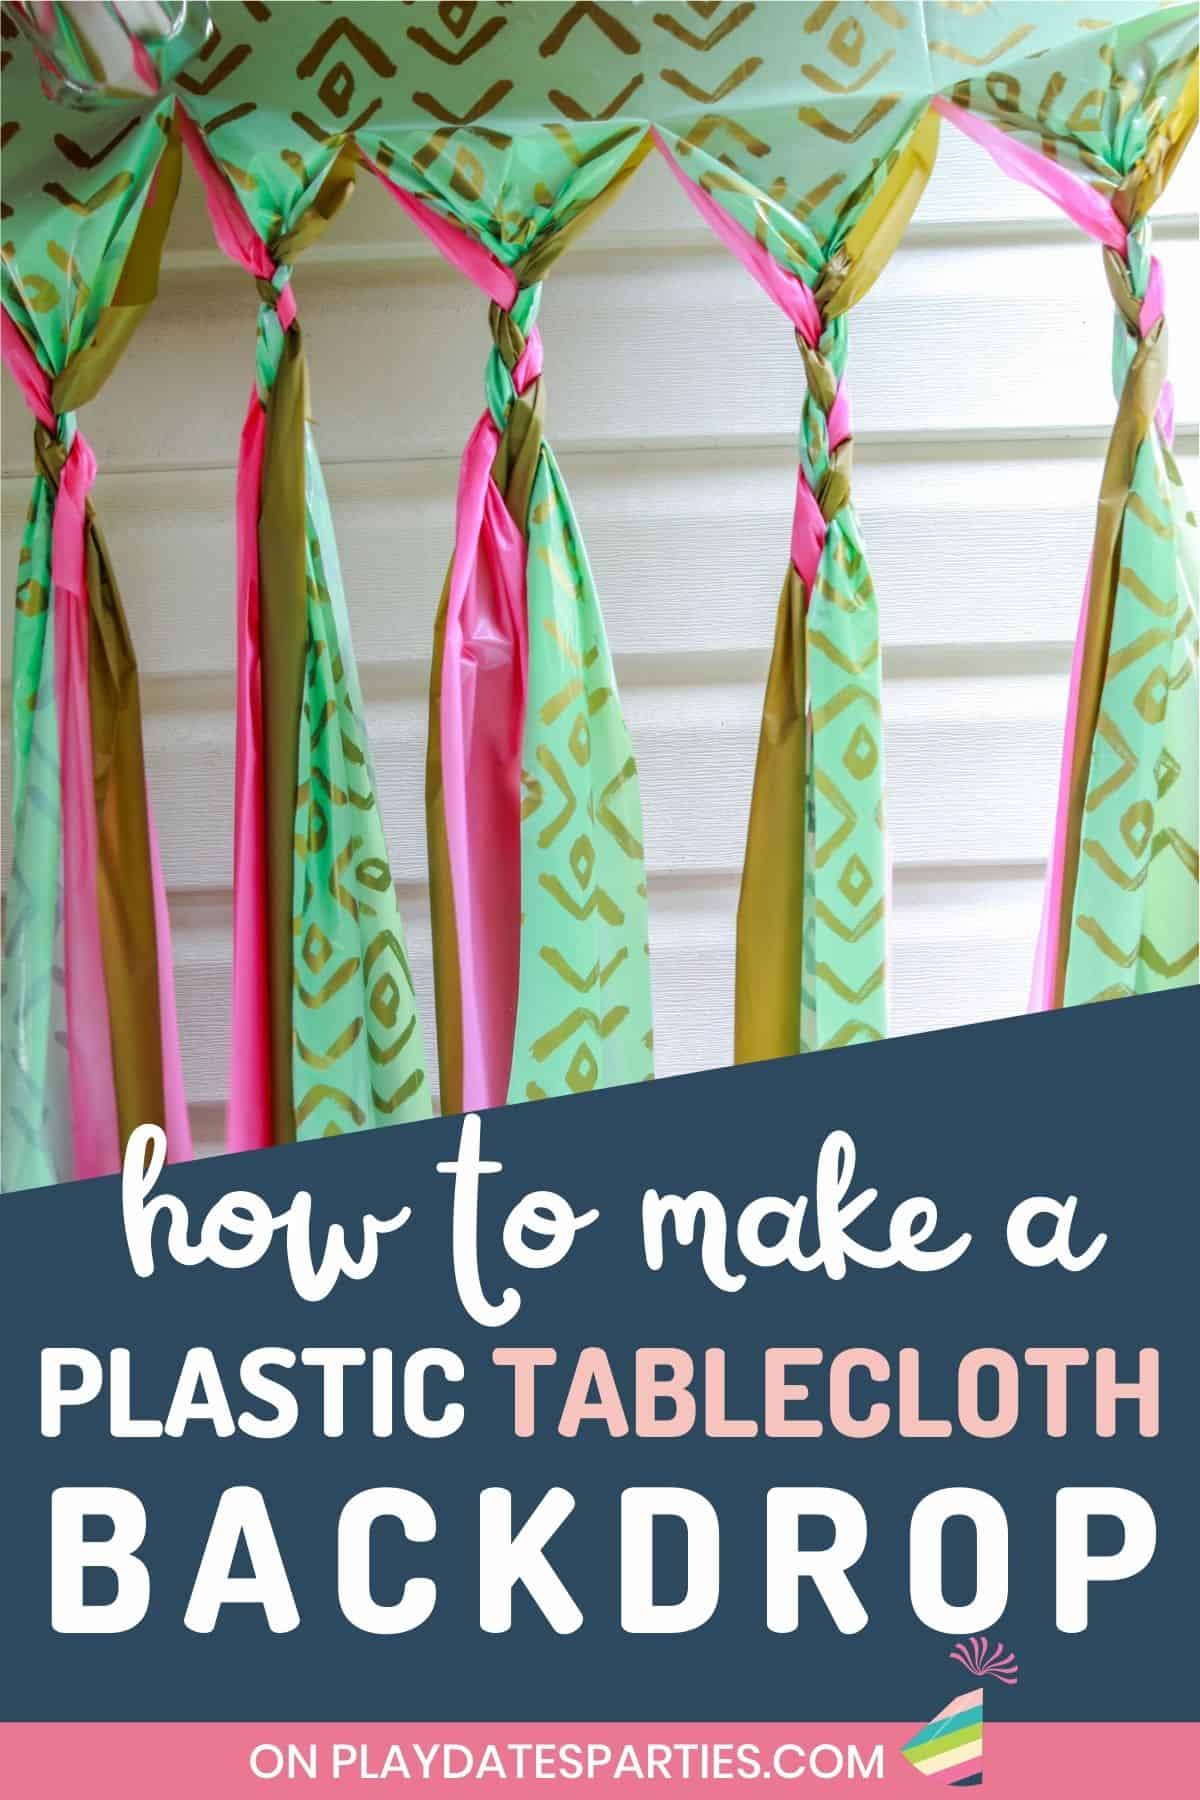 Braided party curtain with three tablecloths with a text overlay how to make a plastic tablecloth backdrop.